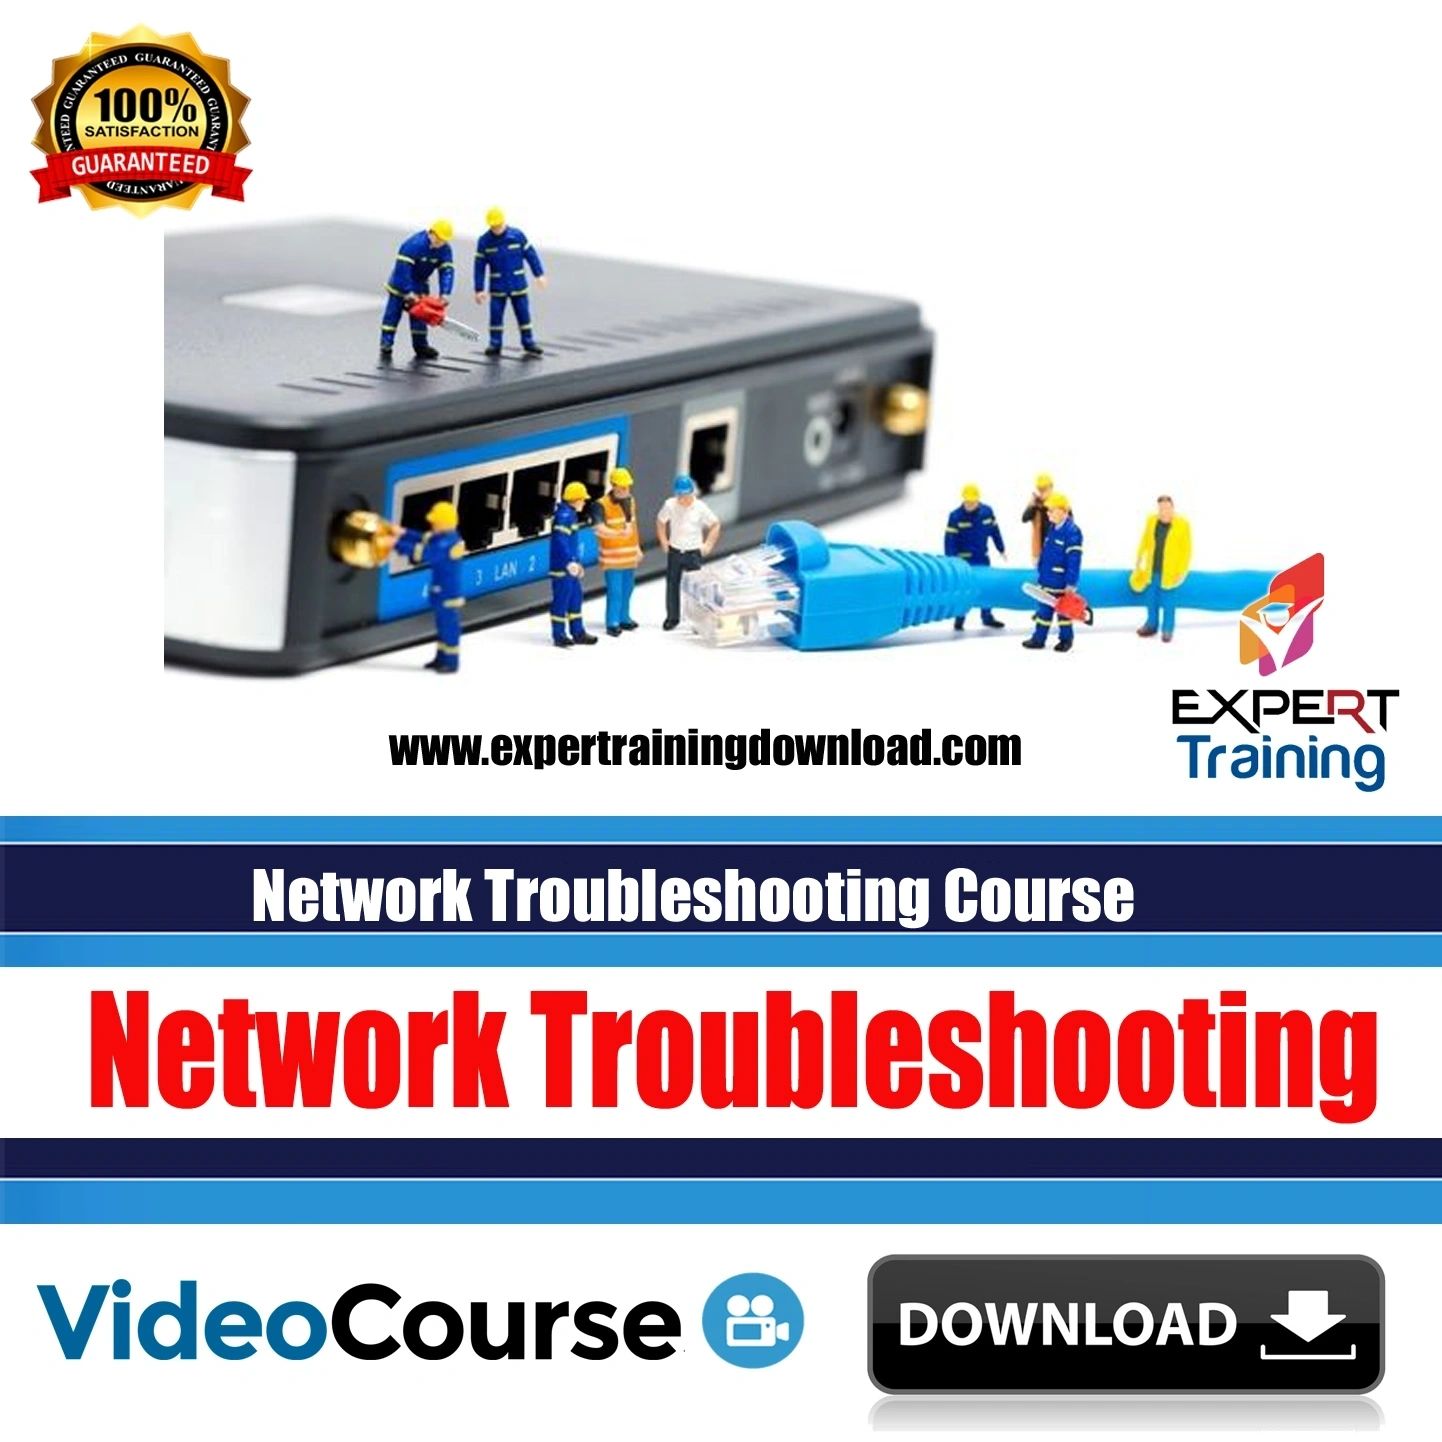 Network Troubleshooting (20 + Hours ) Course